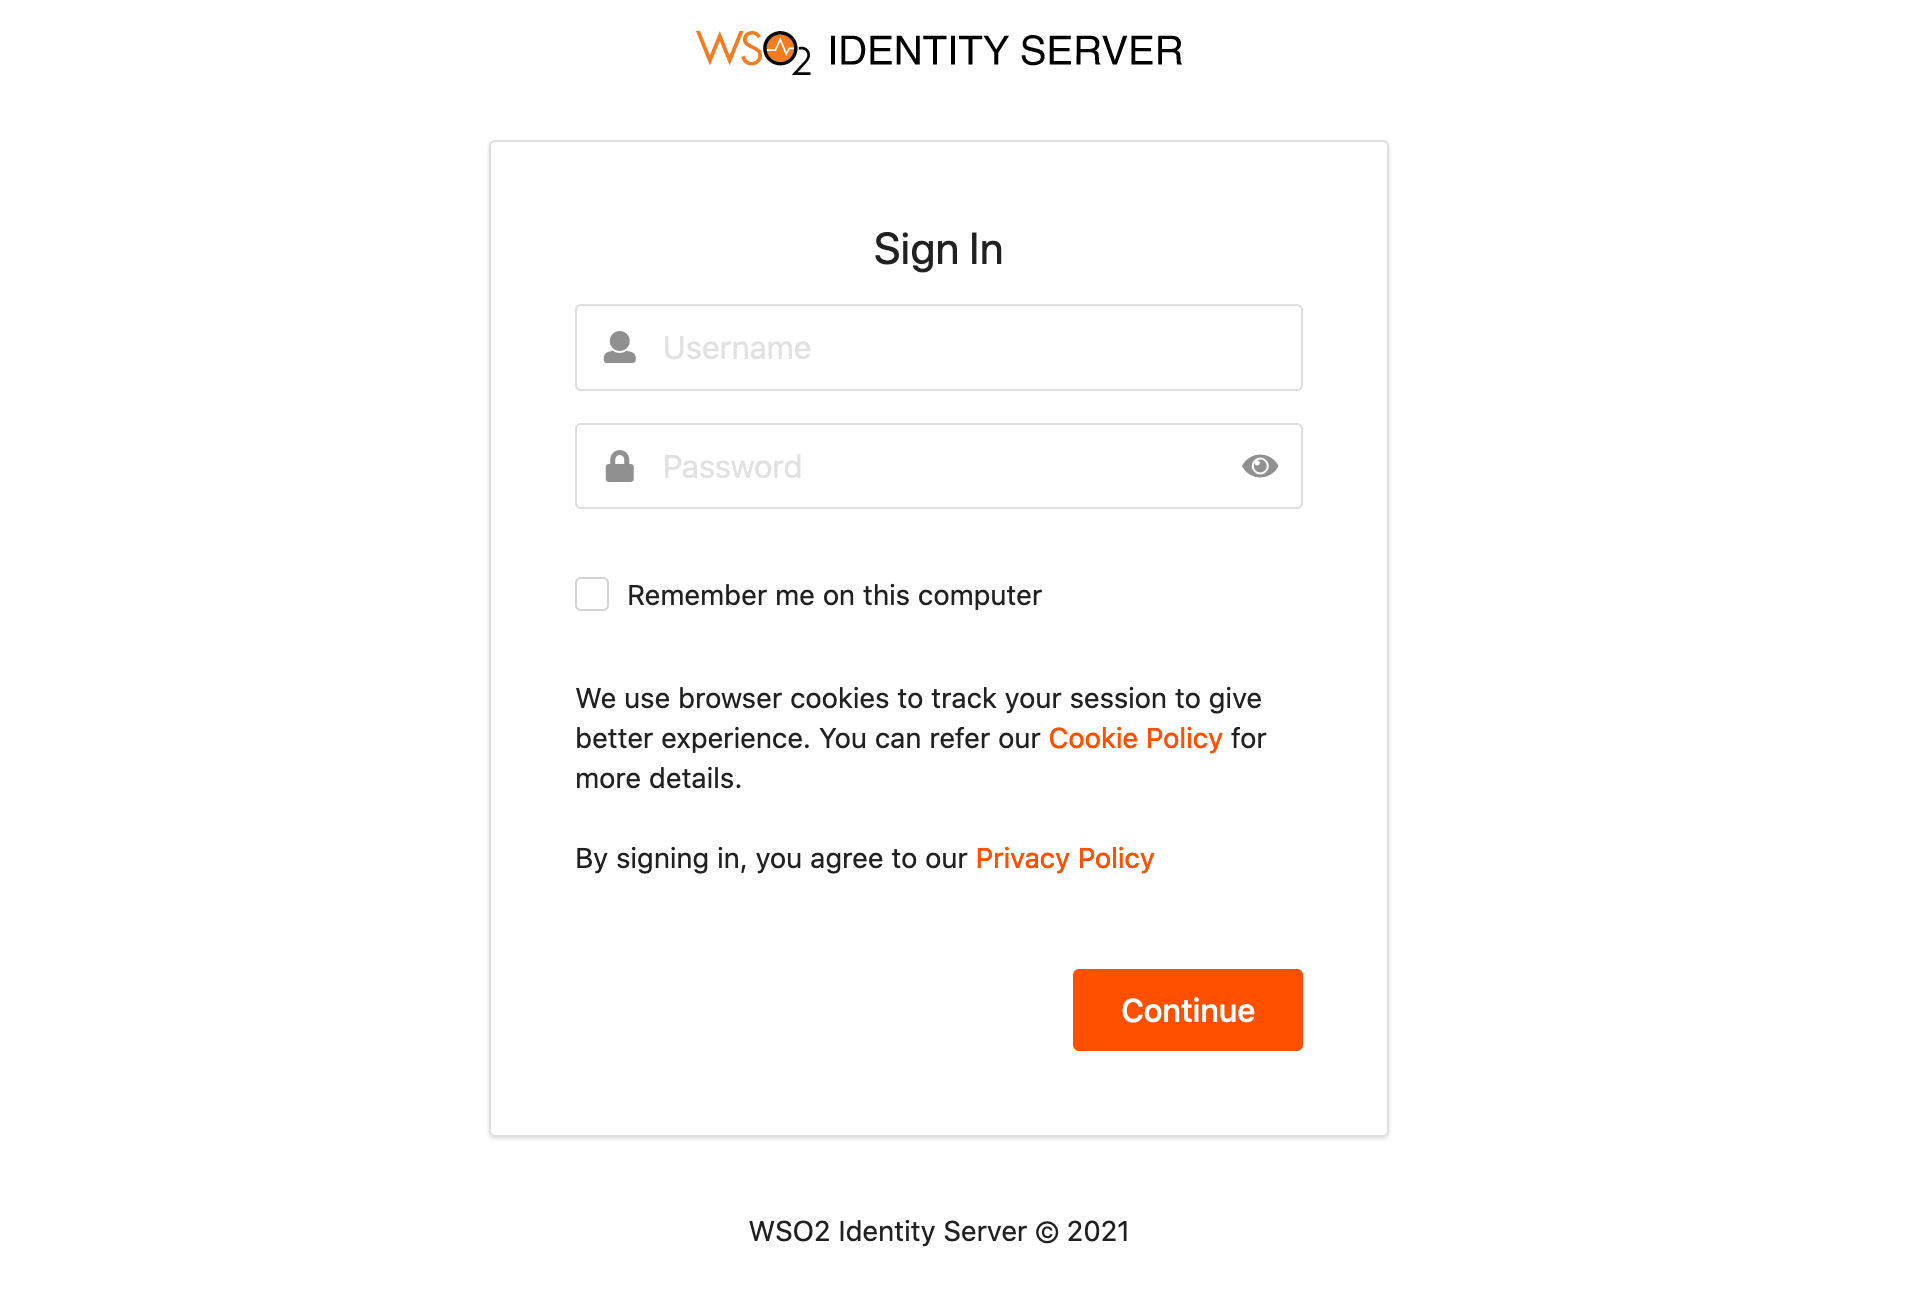 WSO2 Identity Server sign in page